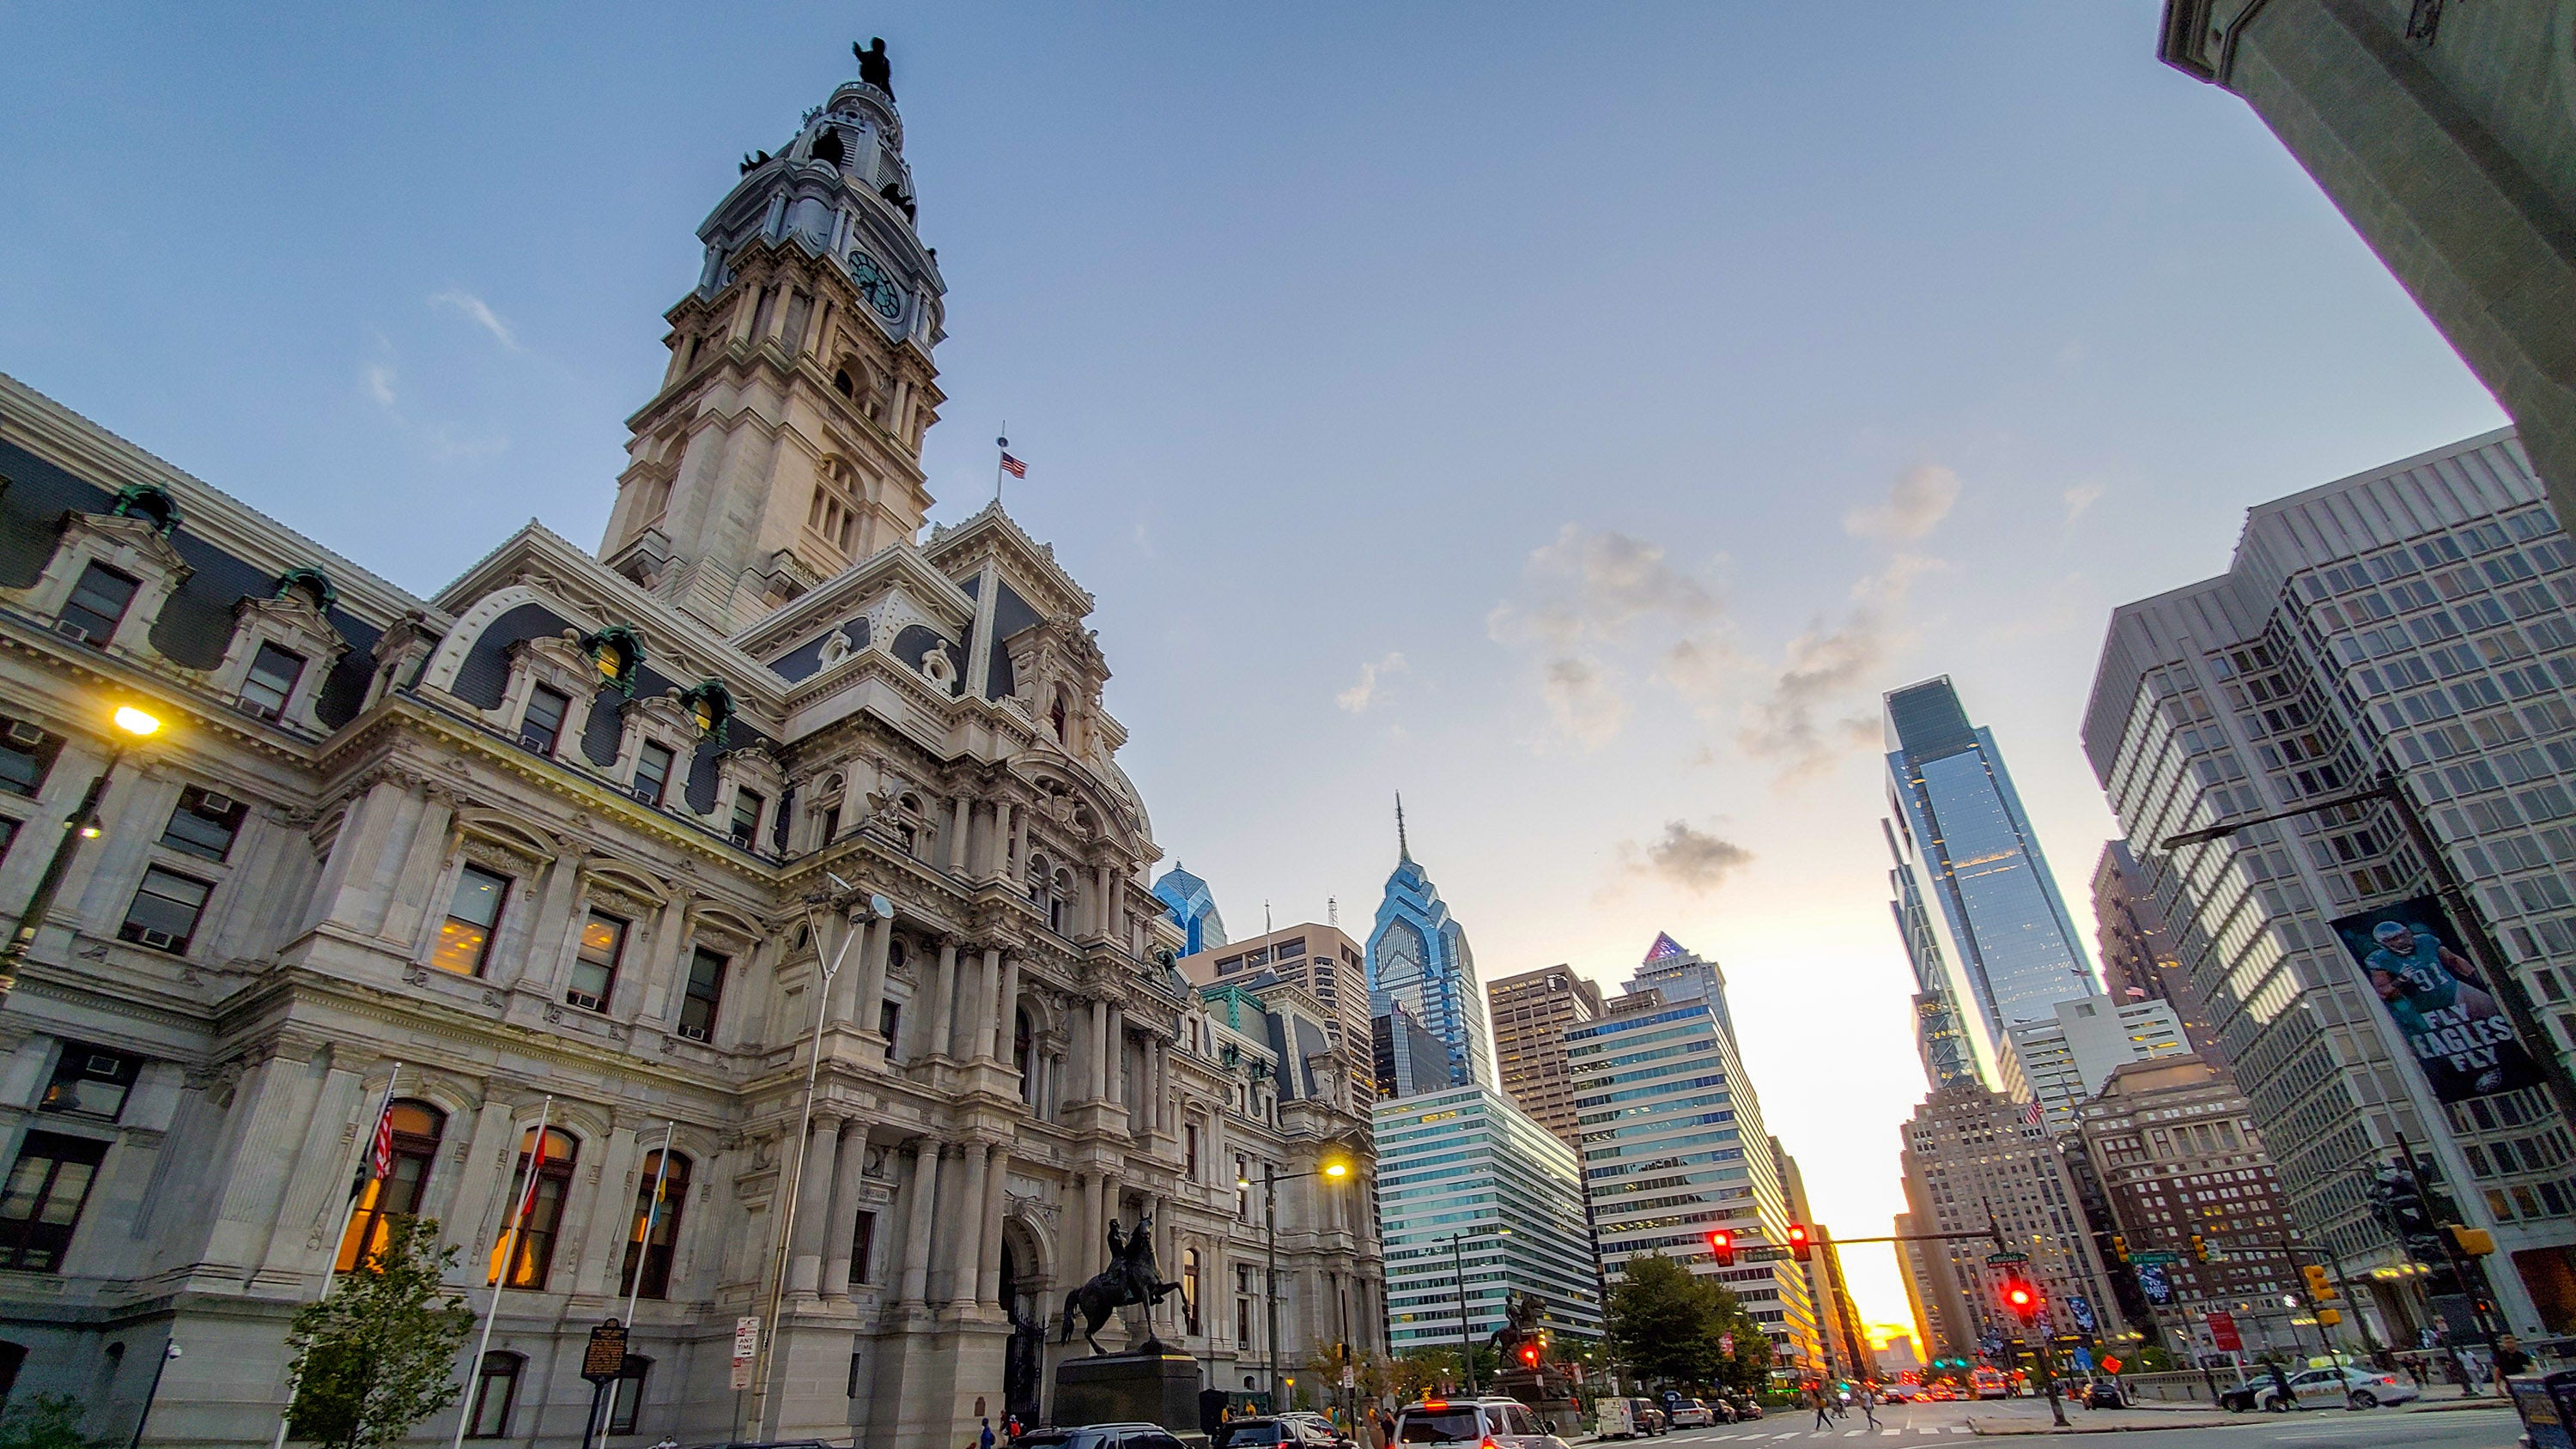 Philadelphia city council votes to permanently ban wearing wearing